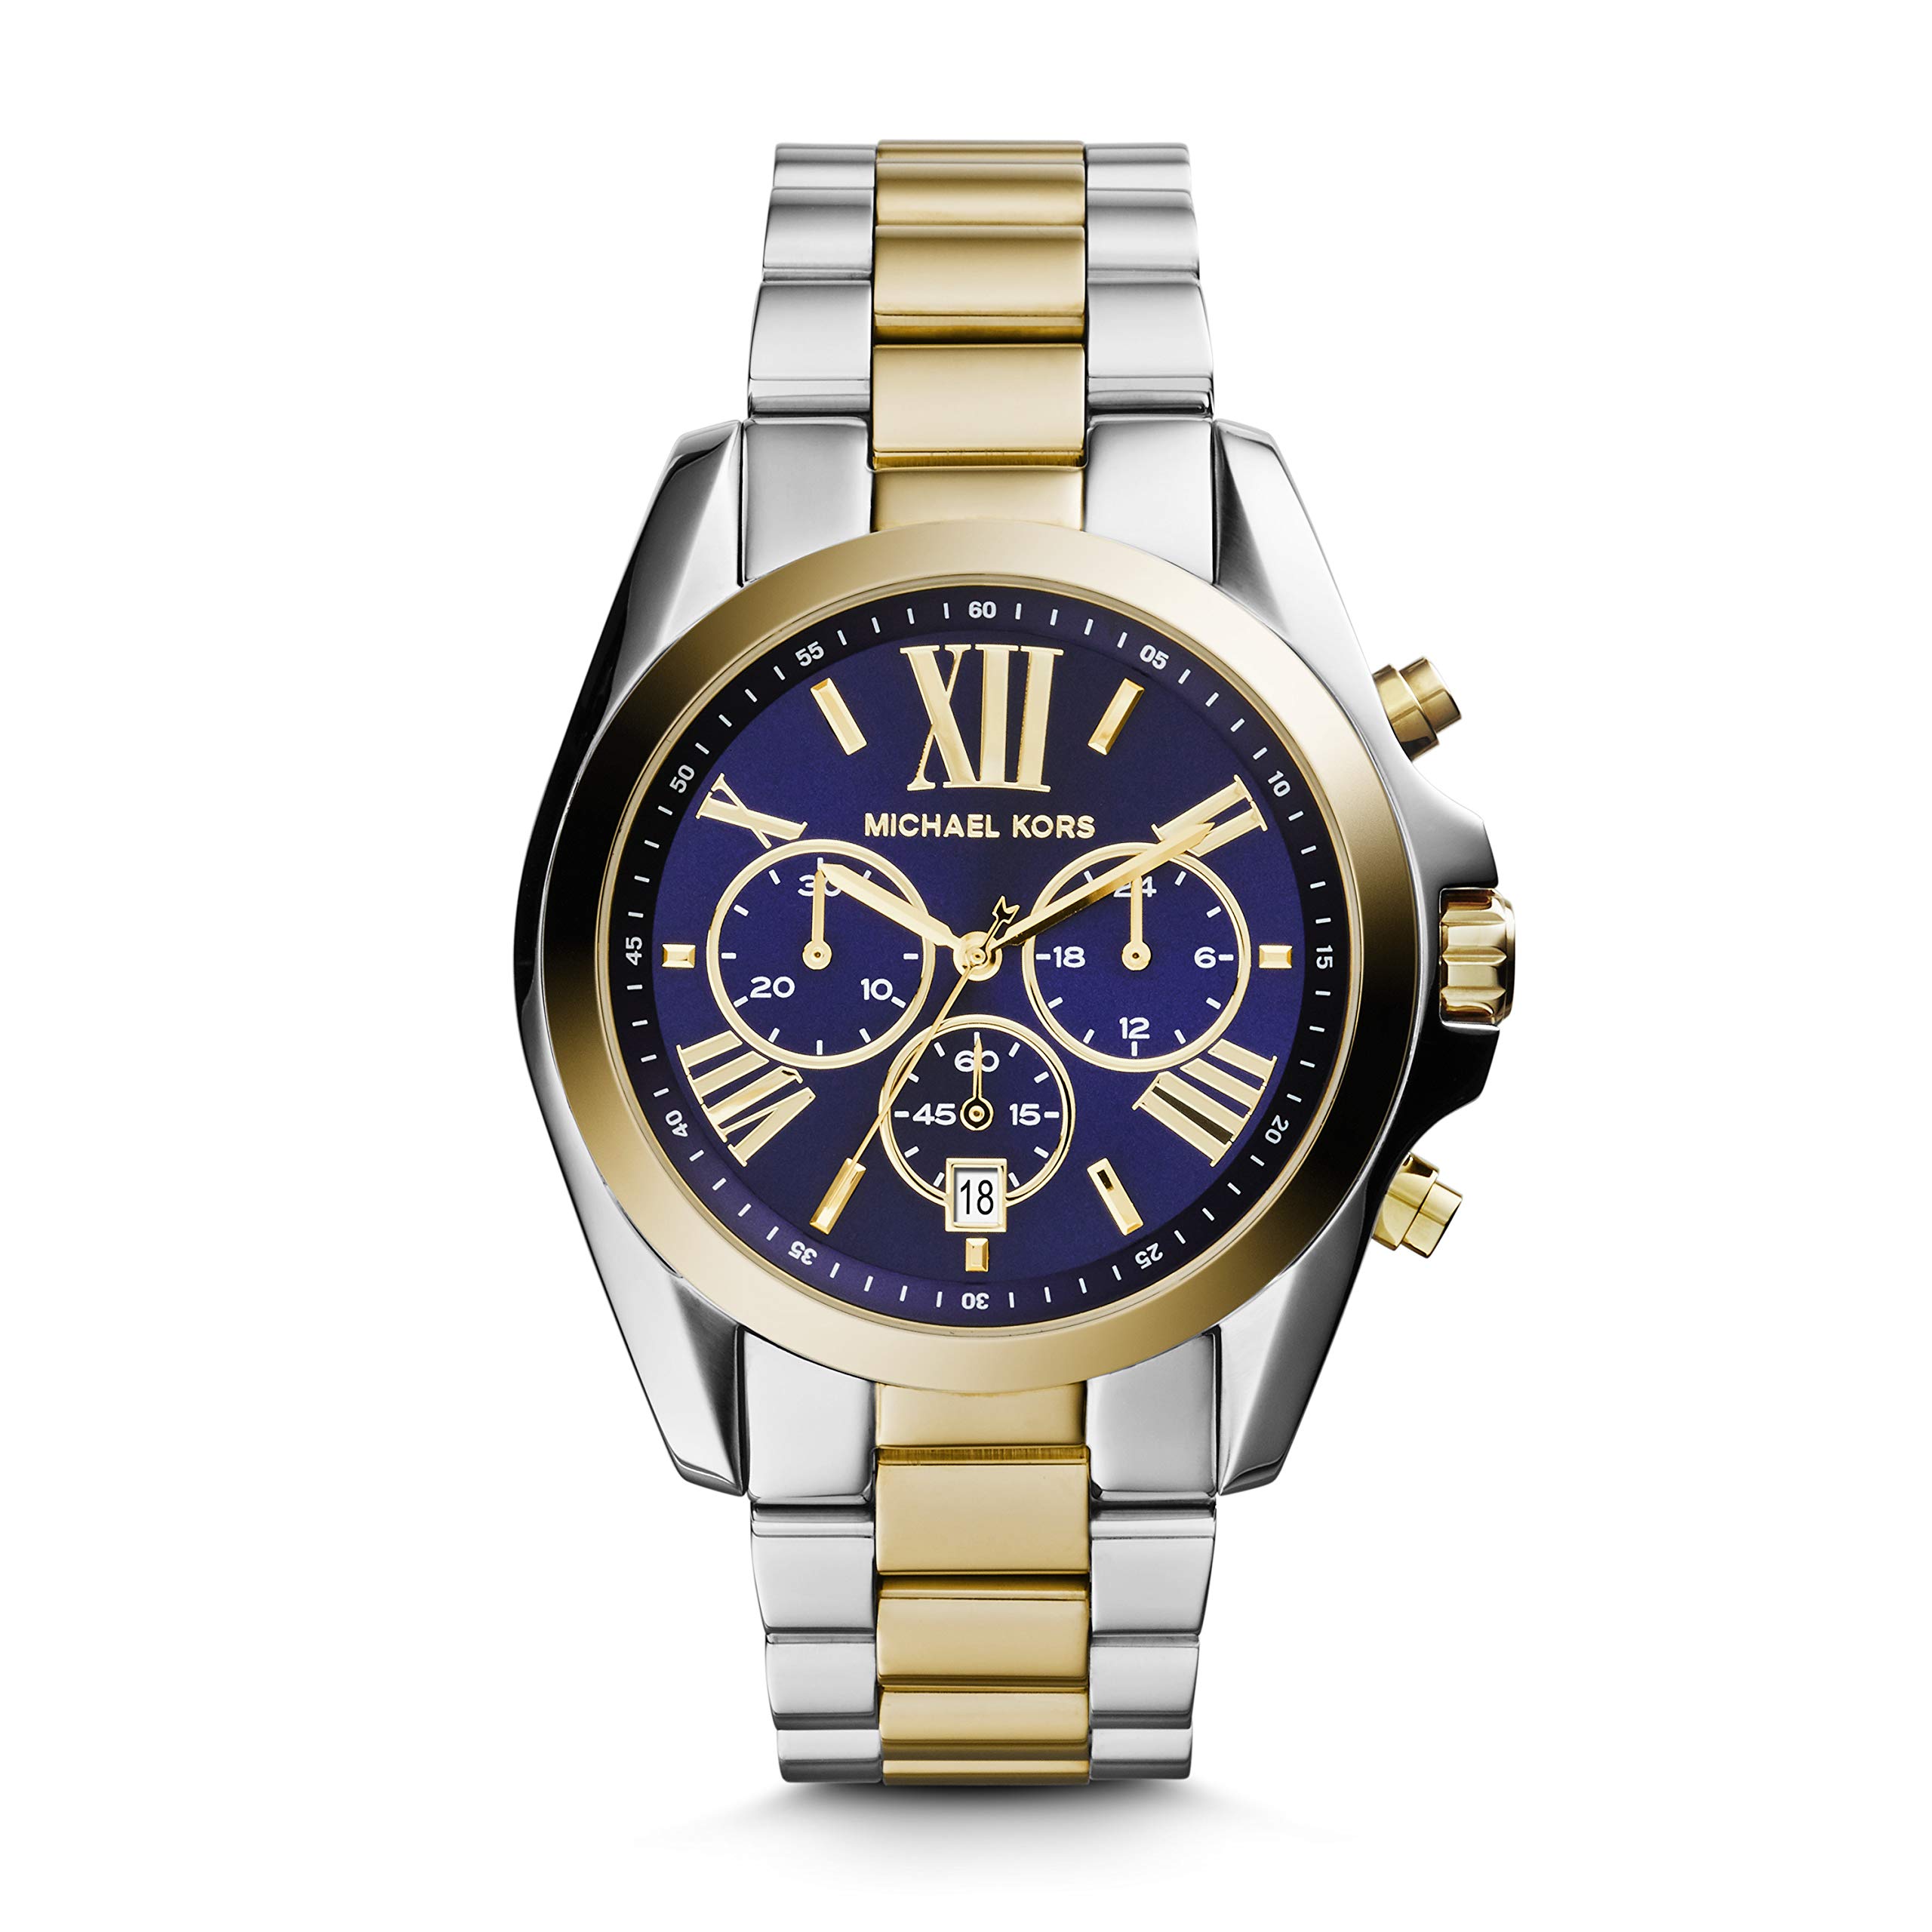 Michael Kors Watches Womens Lexington Quartz Watch with Stainless Steel  Strap Gold 20 Model MK7216  Clothing Shoes  Jewelry  Amazoncom